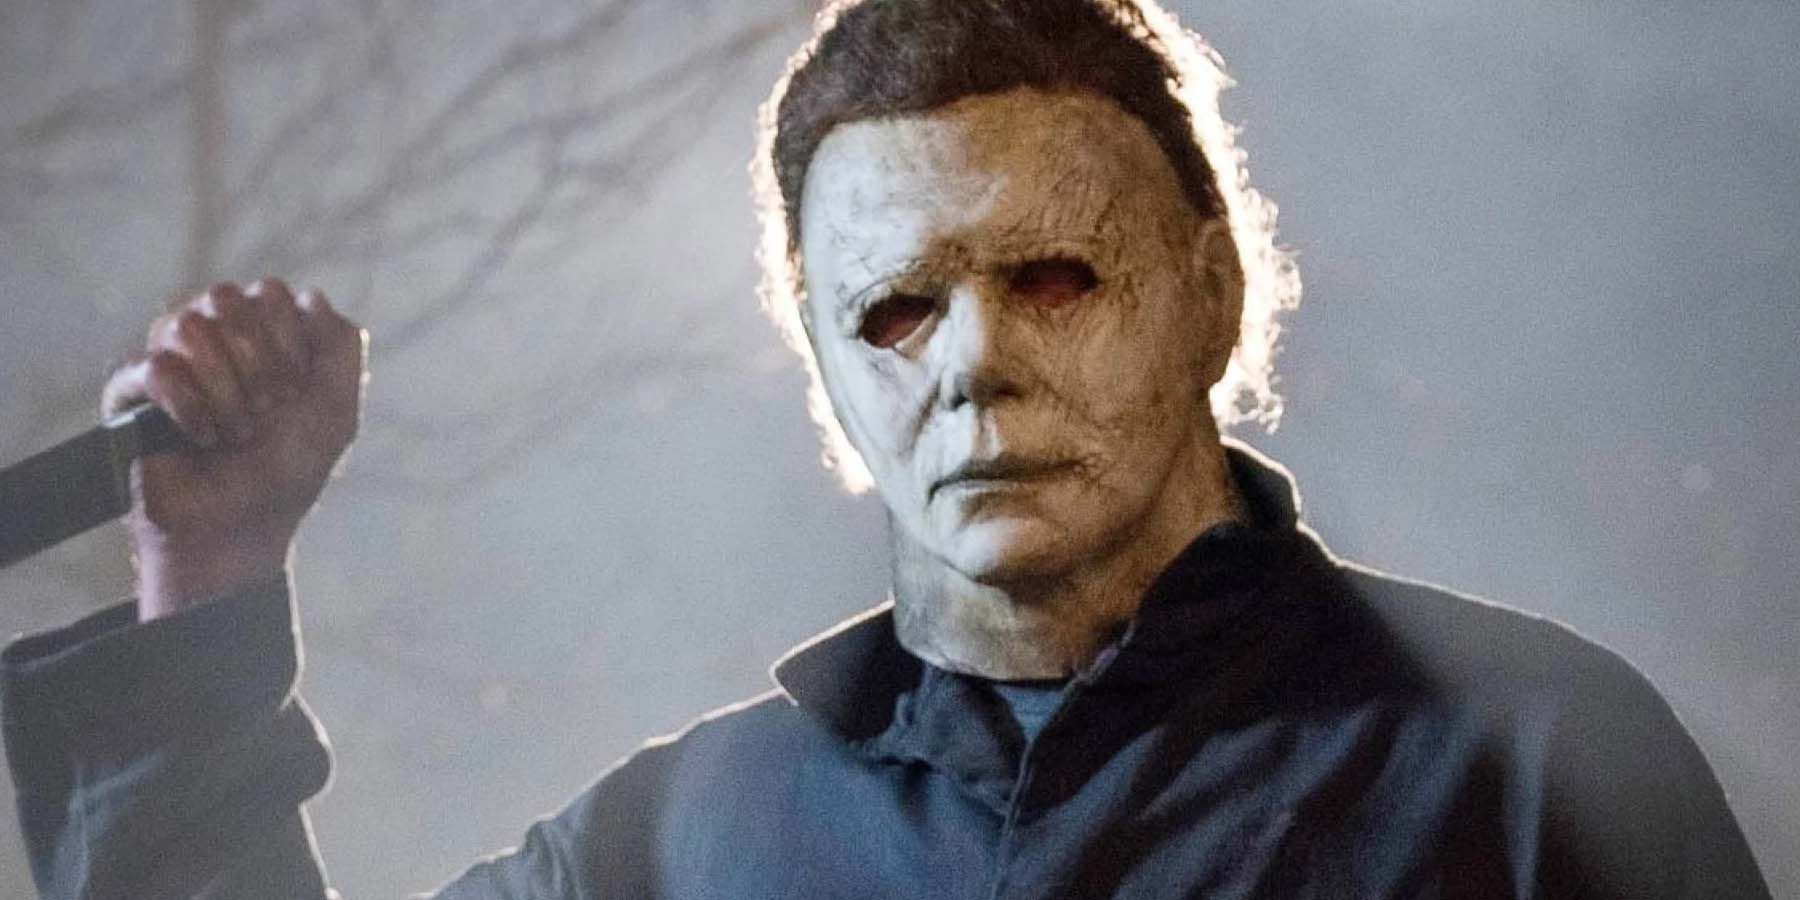 Michael Myers in the Halloween movies